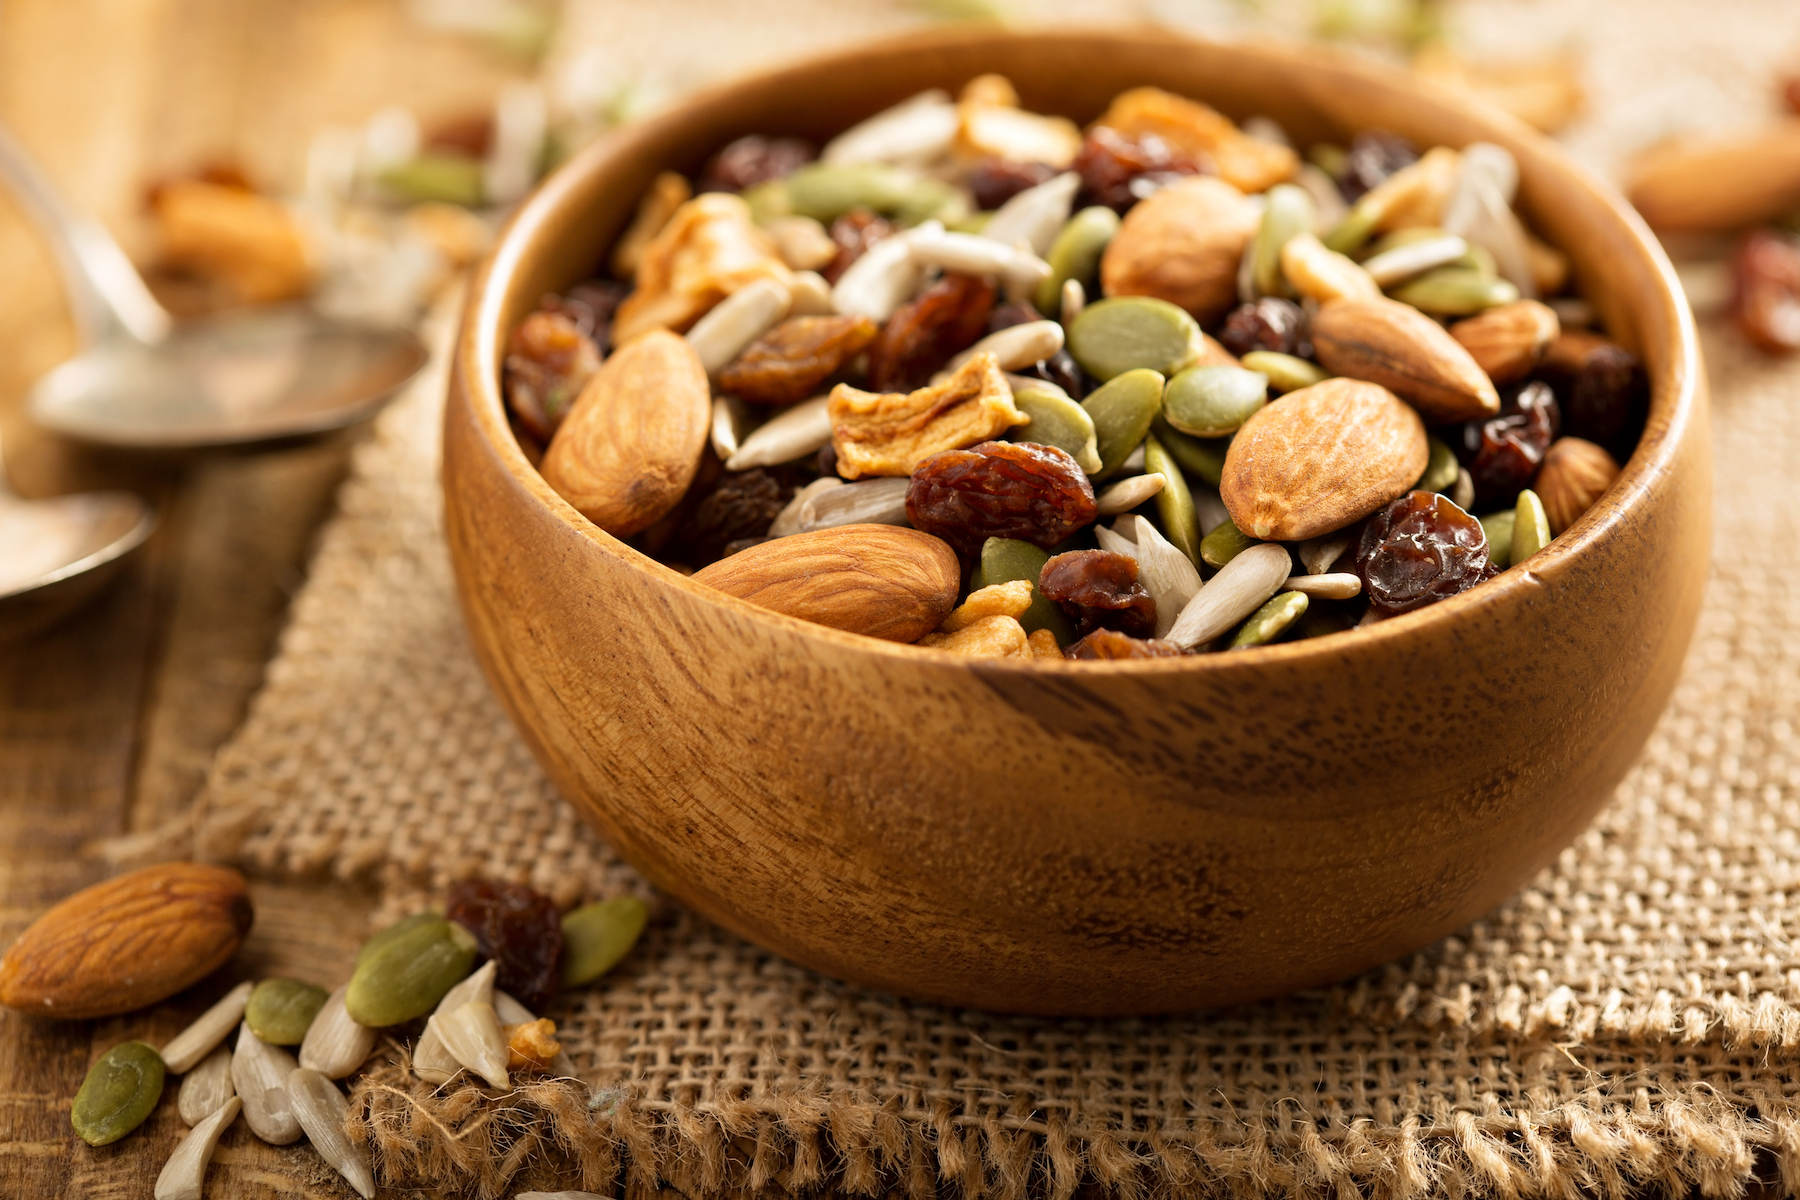 Healthy Foods That Pack on the Pounds: Trail Mix